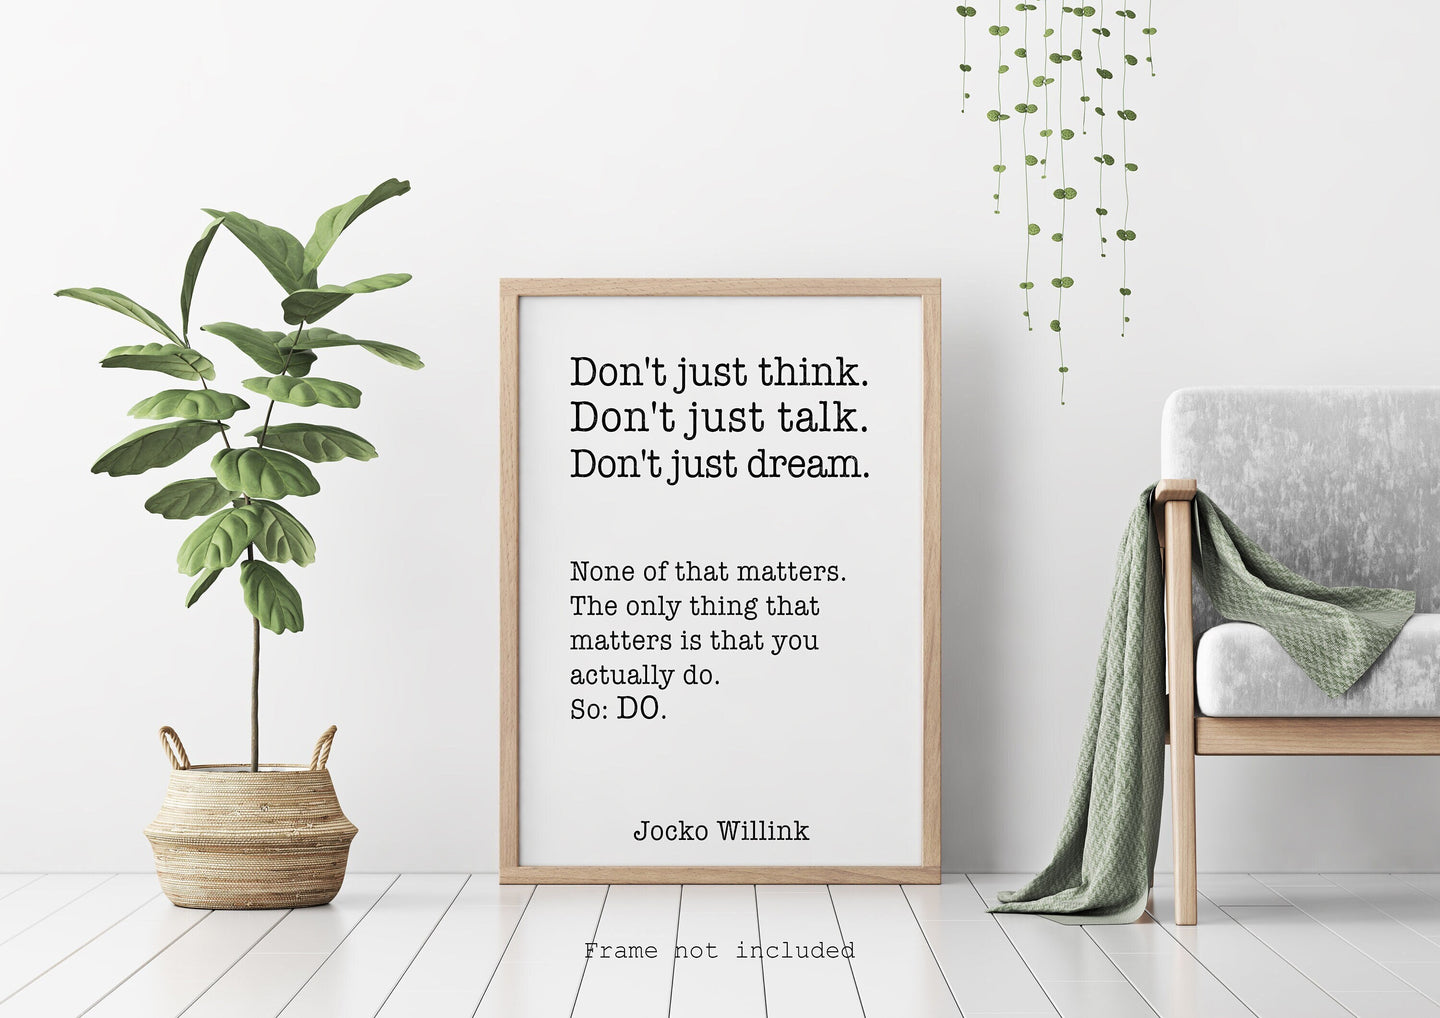 Jocko Willink Print - The only thing that matters is that you actually do - Inspirational poster - motivational podcast UNFRAMED